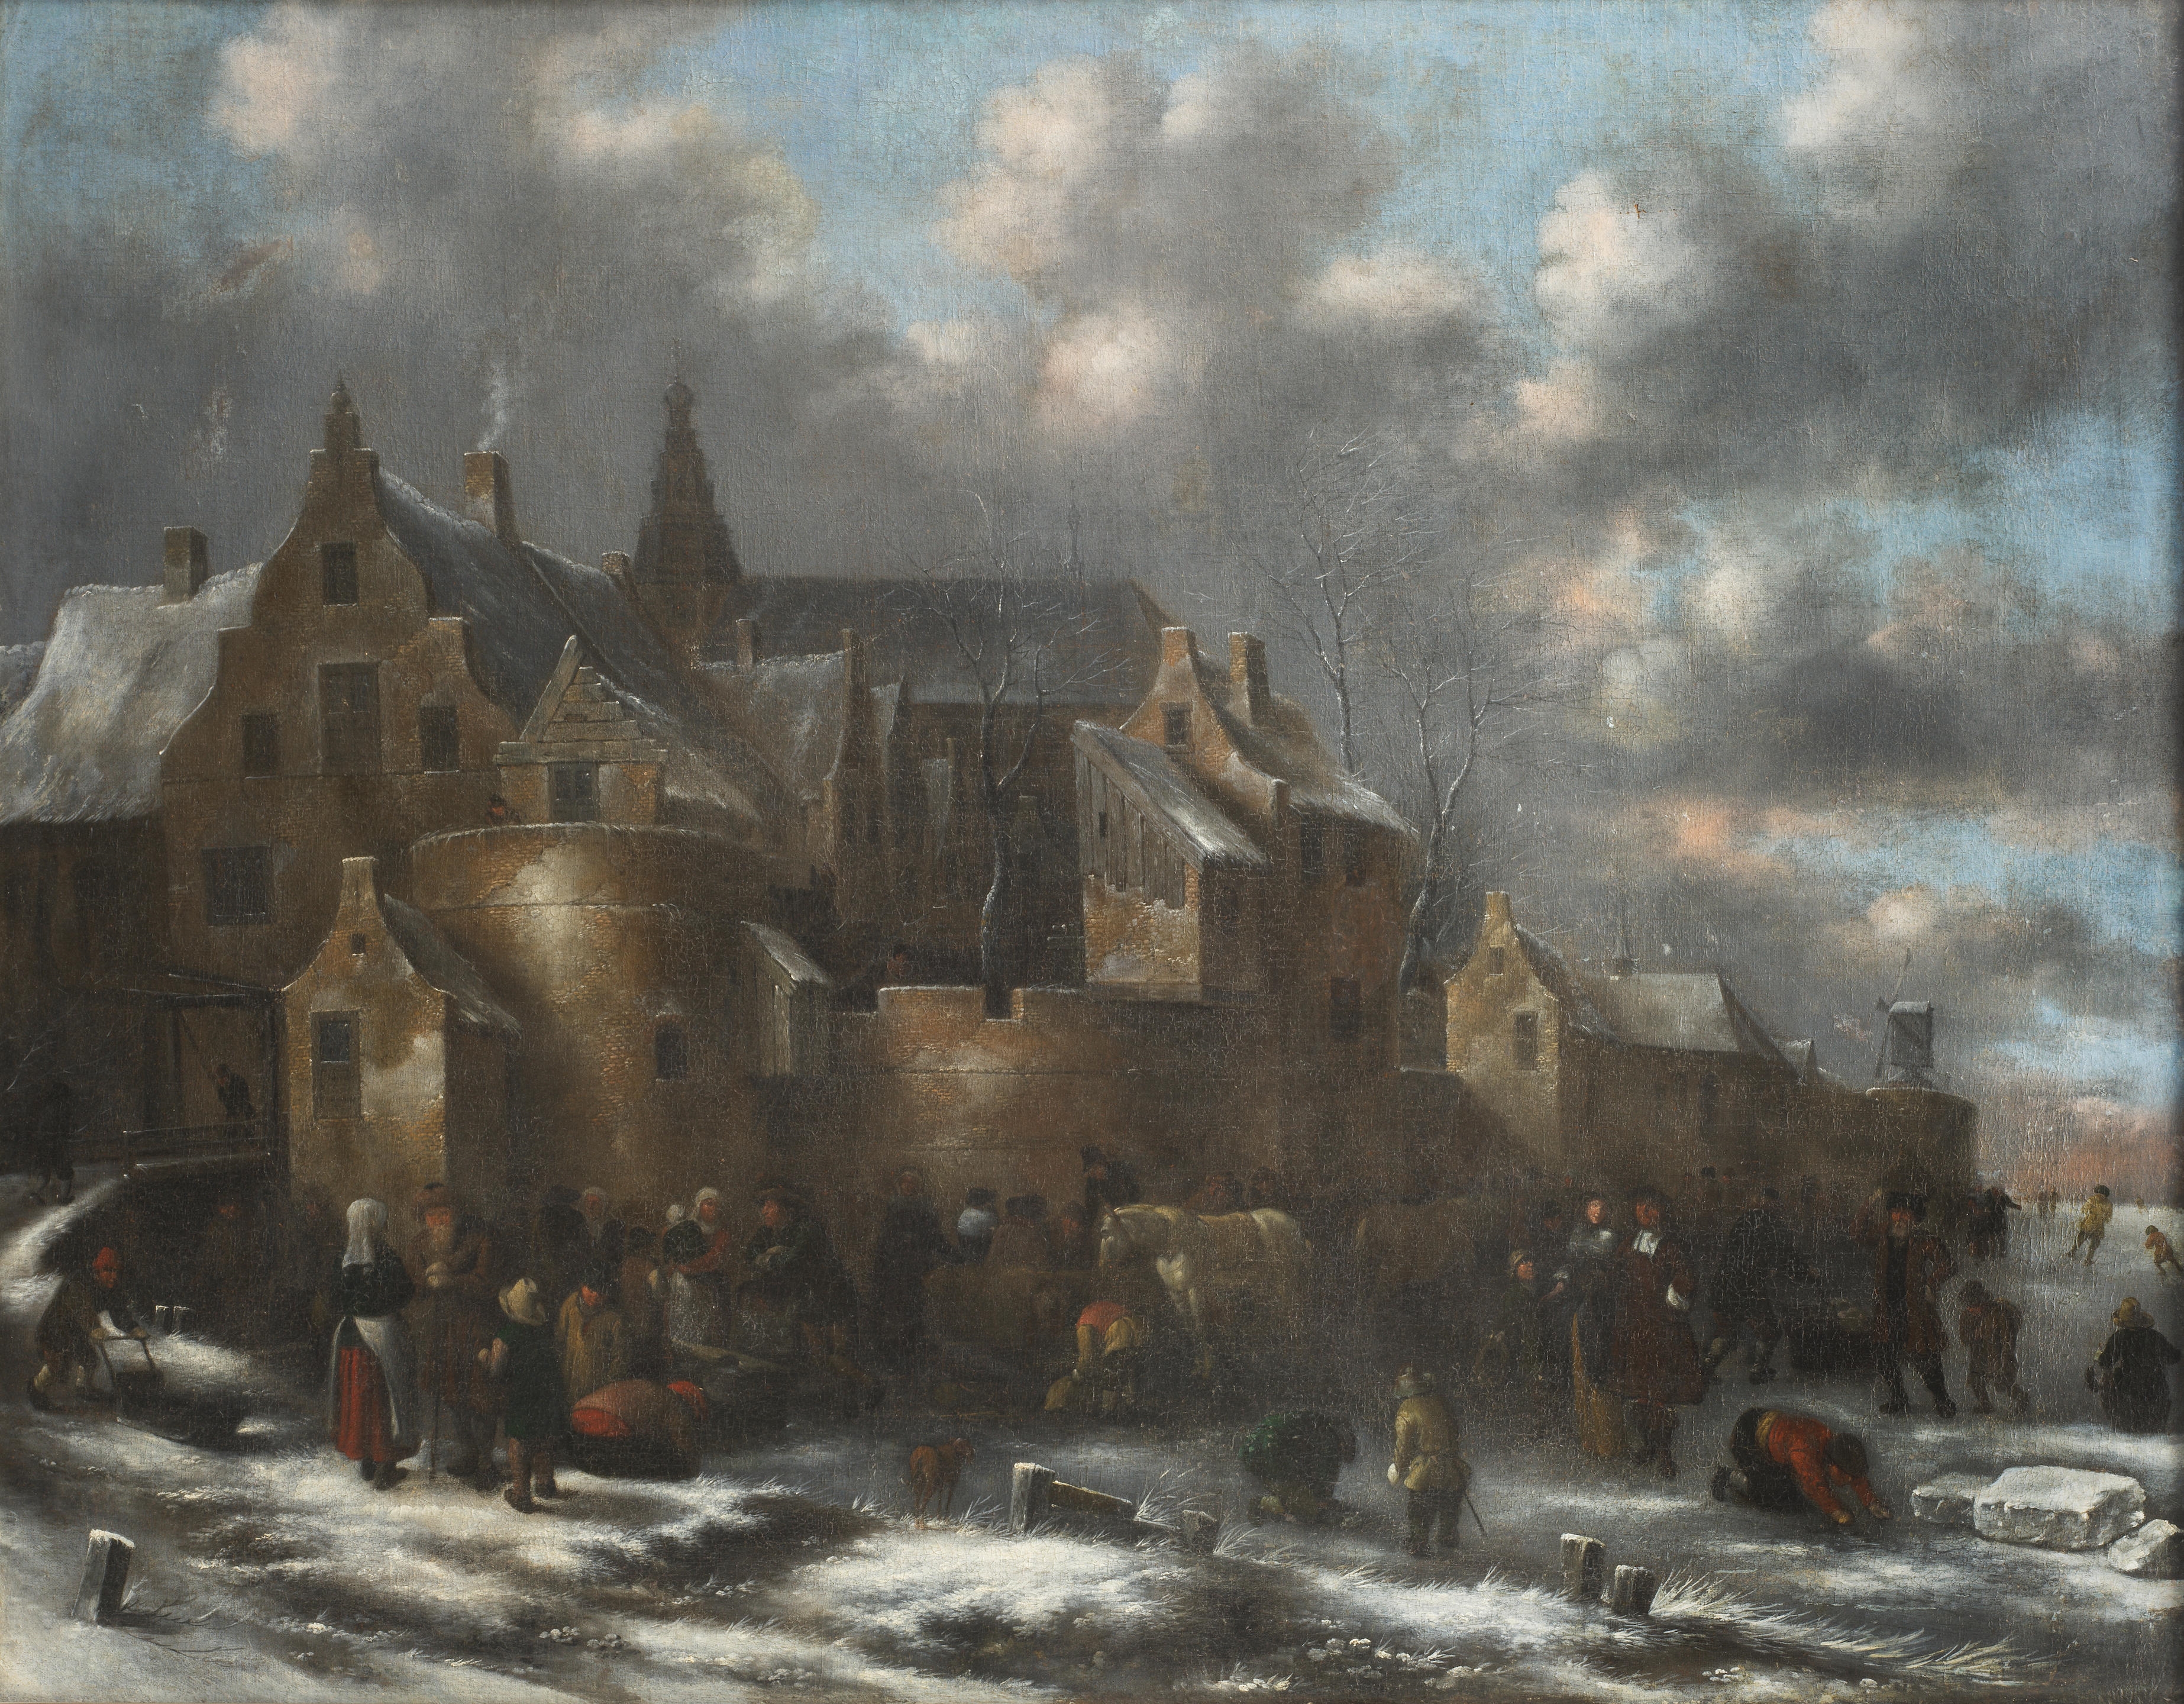 A winter scene with figures and horses outside a town - Klaes Molenaer